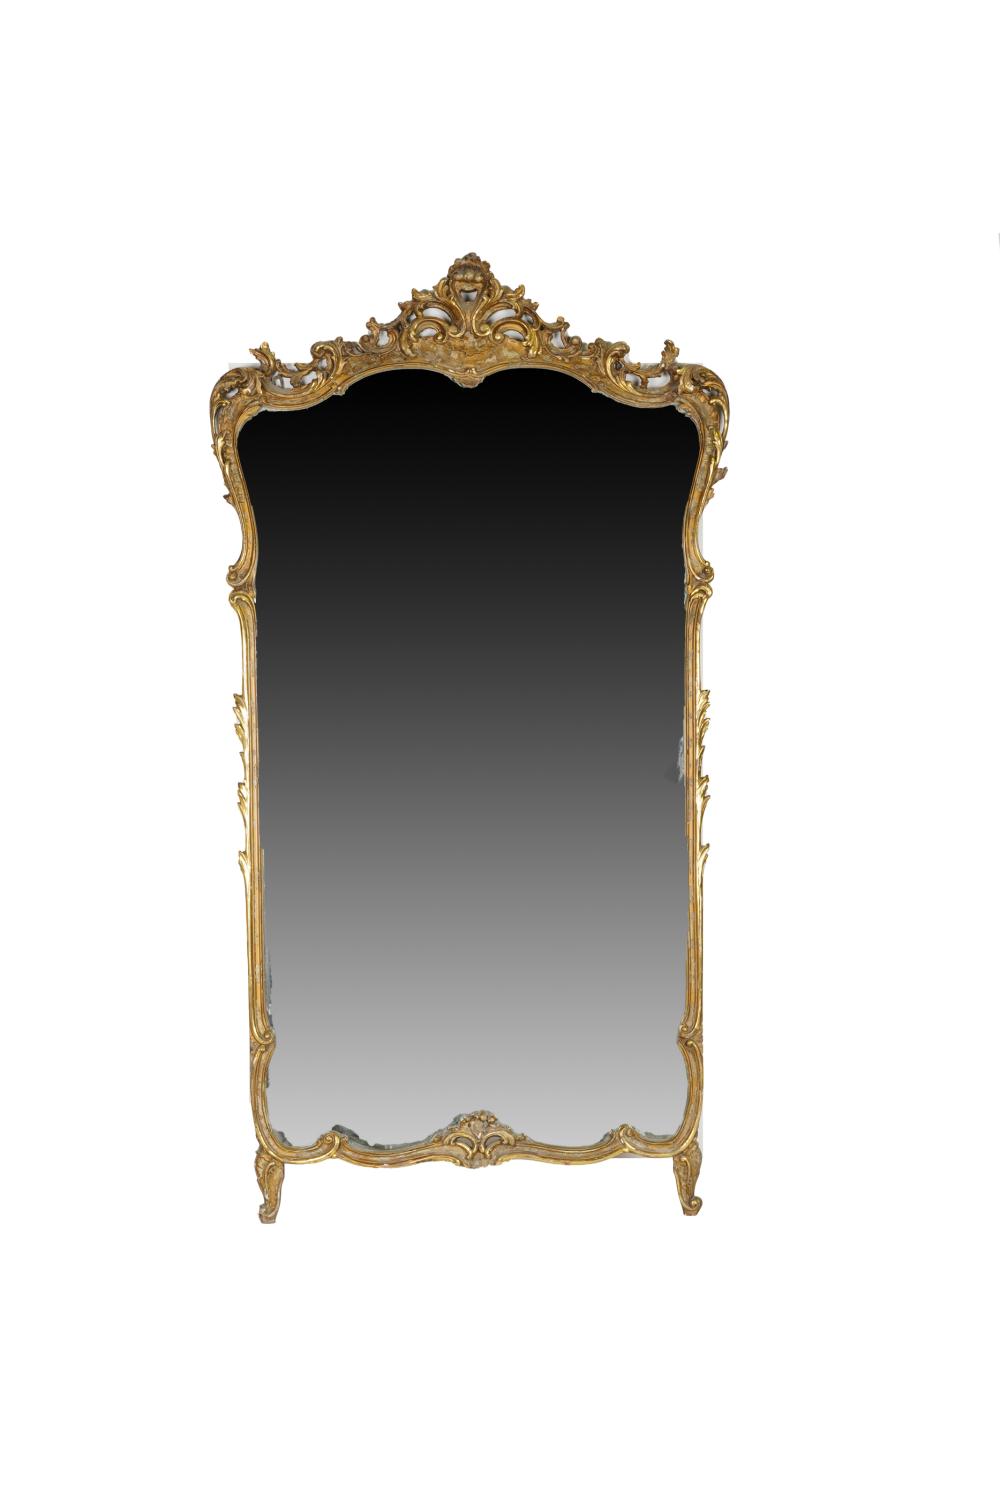 CONTINENTAL GILT MIRRORwood and